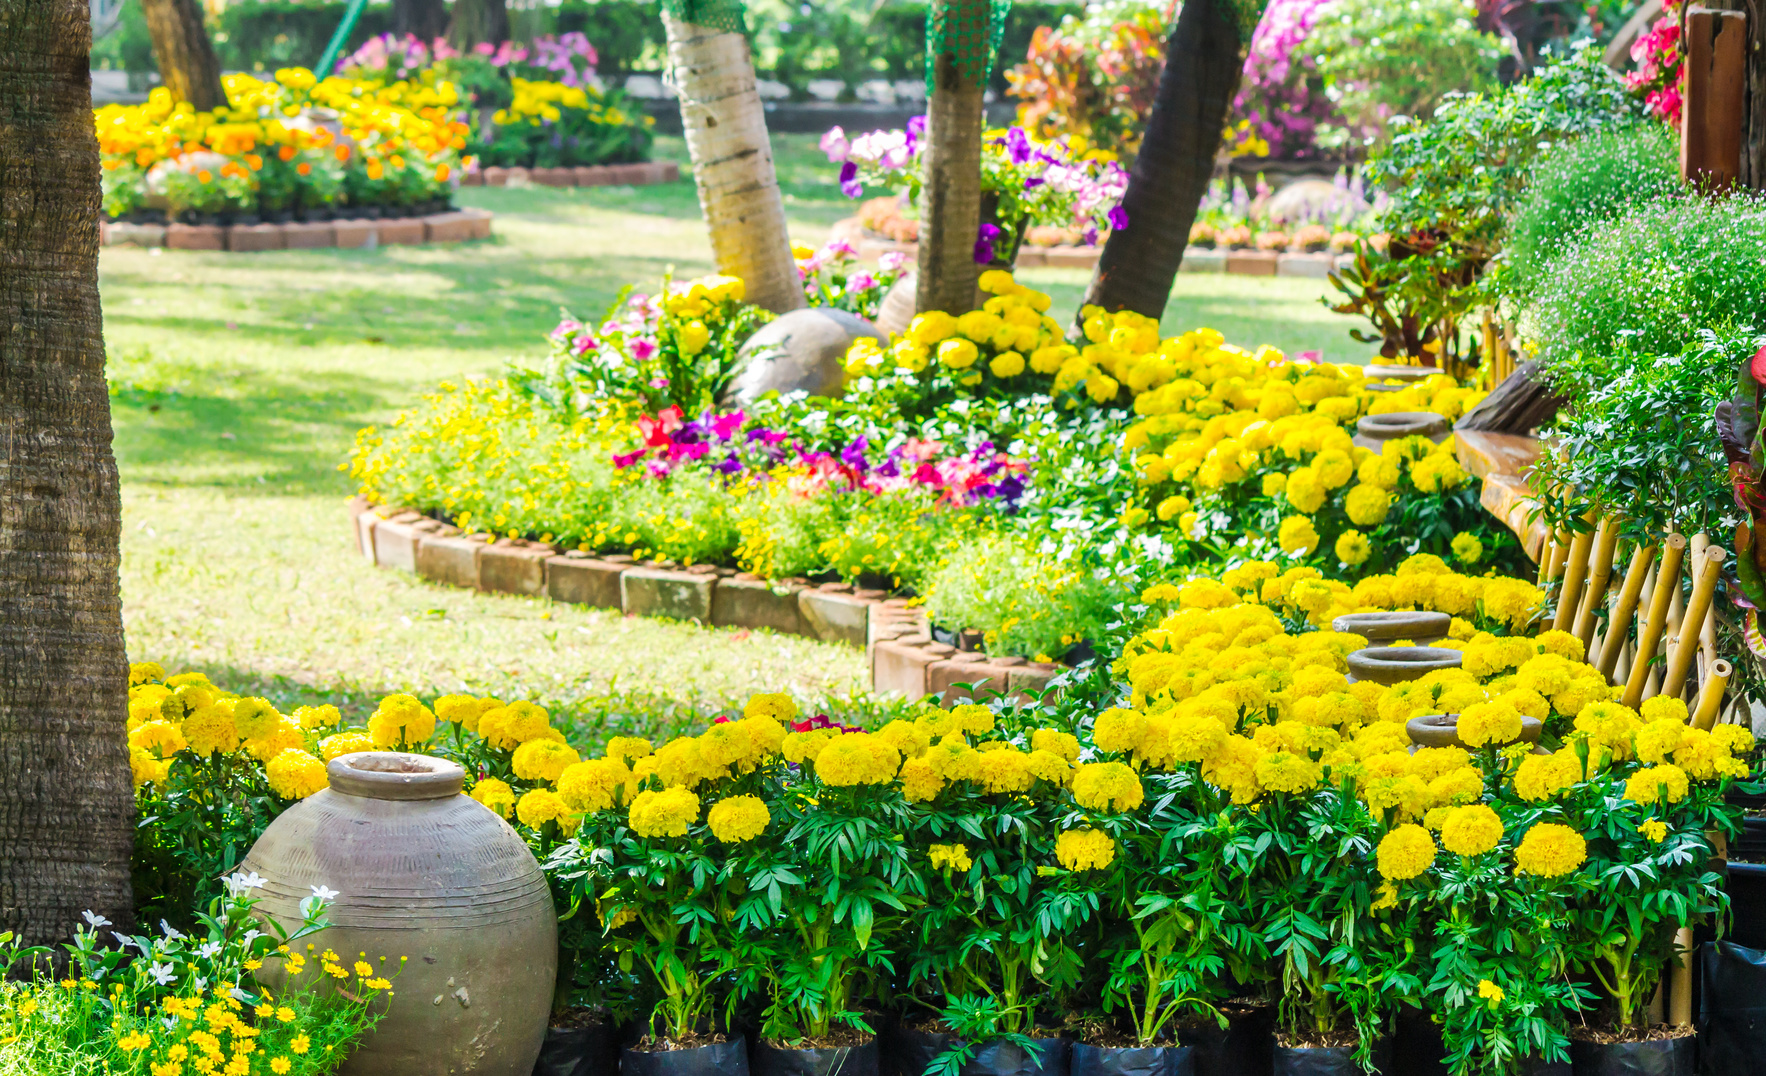 Flowers in the garden on summer. /Landscaped flower garden with lots of